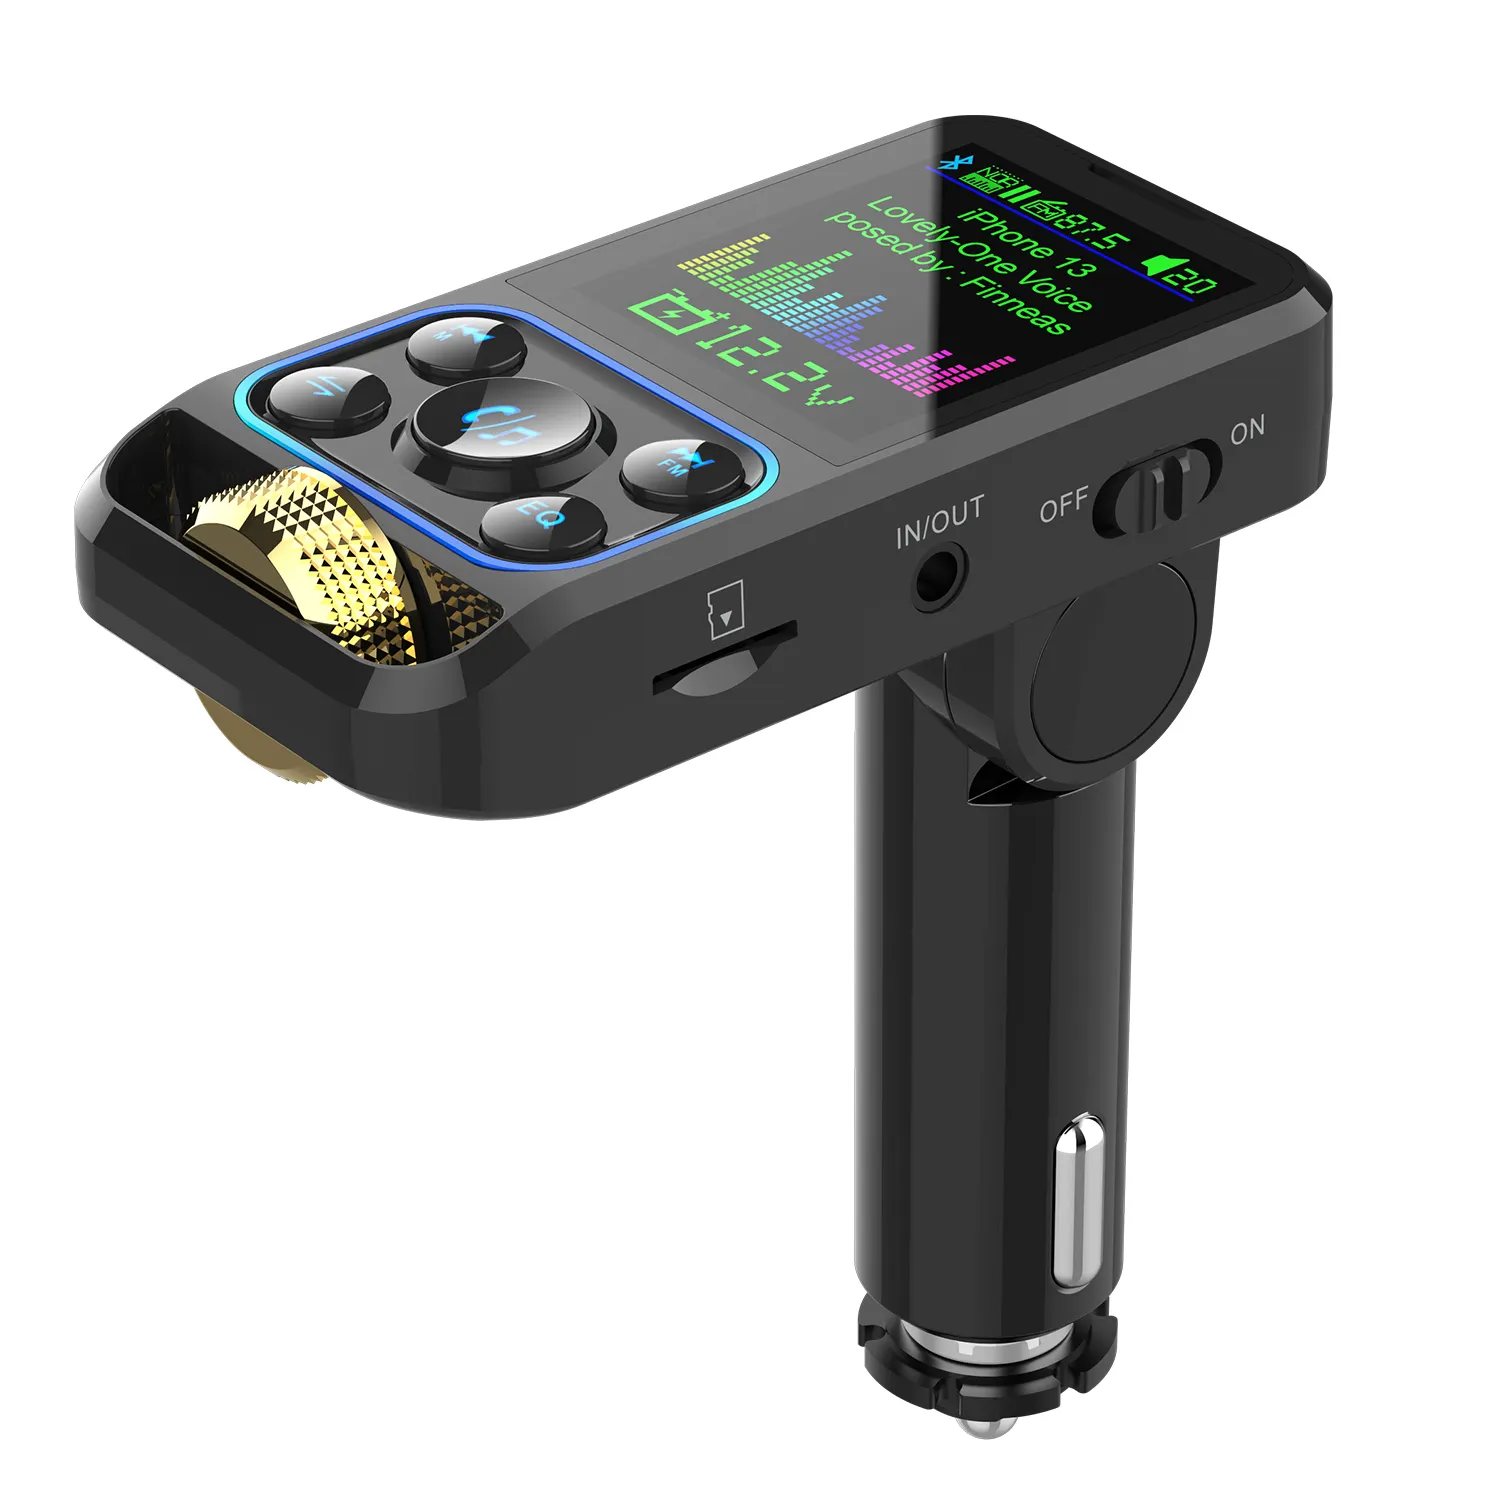 NOUVEAU Support Fast Charge QC3.0/2.0 PD Charger U Disk Mp3 Player Car TF Card AUX Port Bluetooth 5.0 FM Audio Transmitter BC83